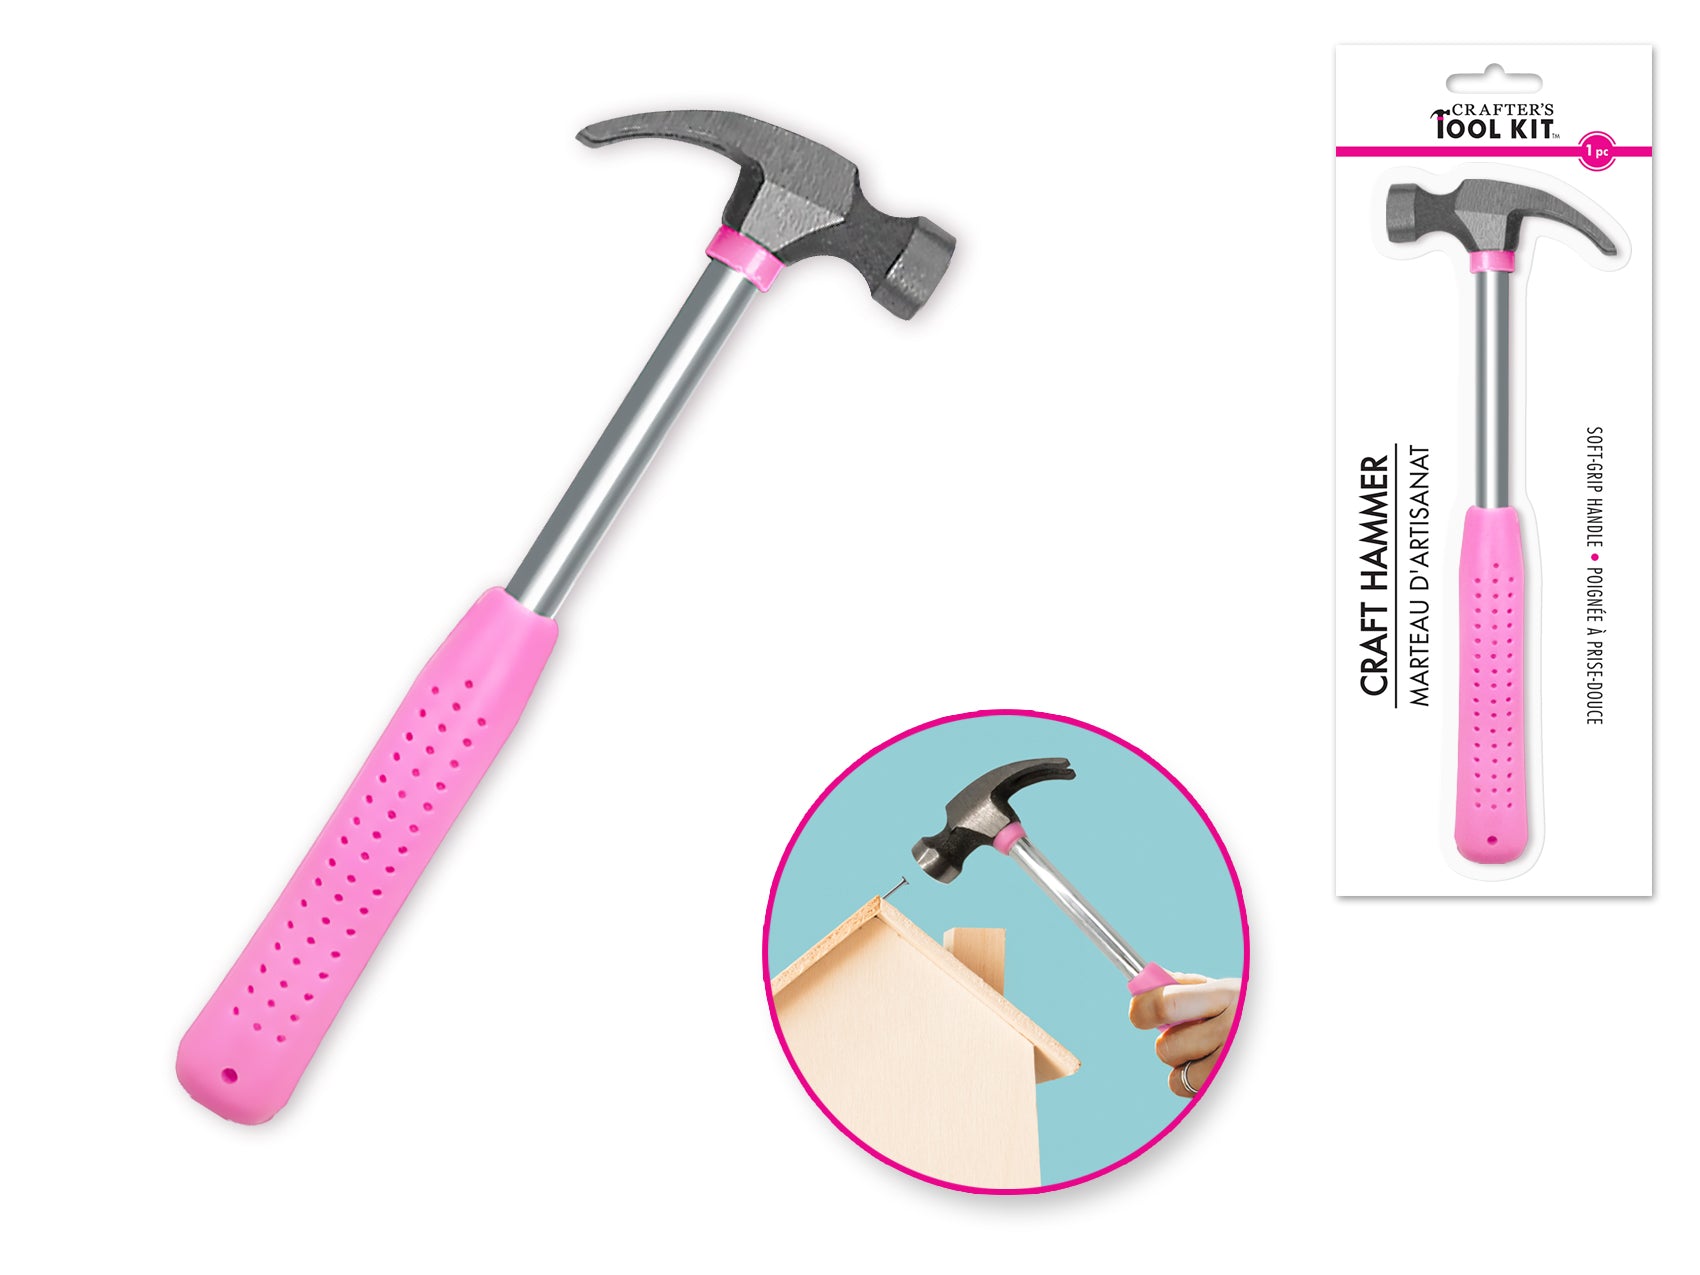 Crafter's Toolkit: 20cm Craft Tap-It Hammer